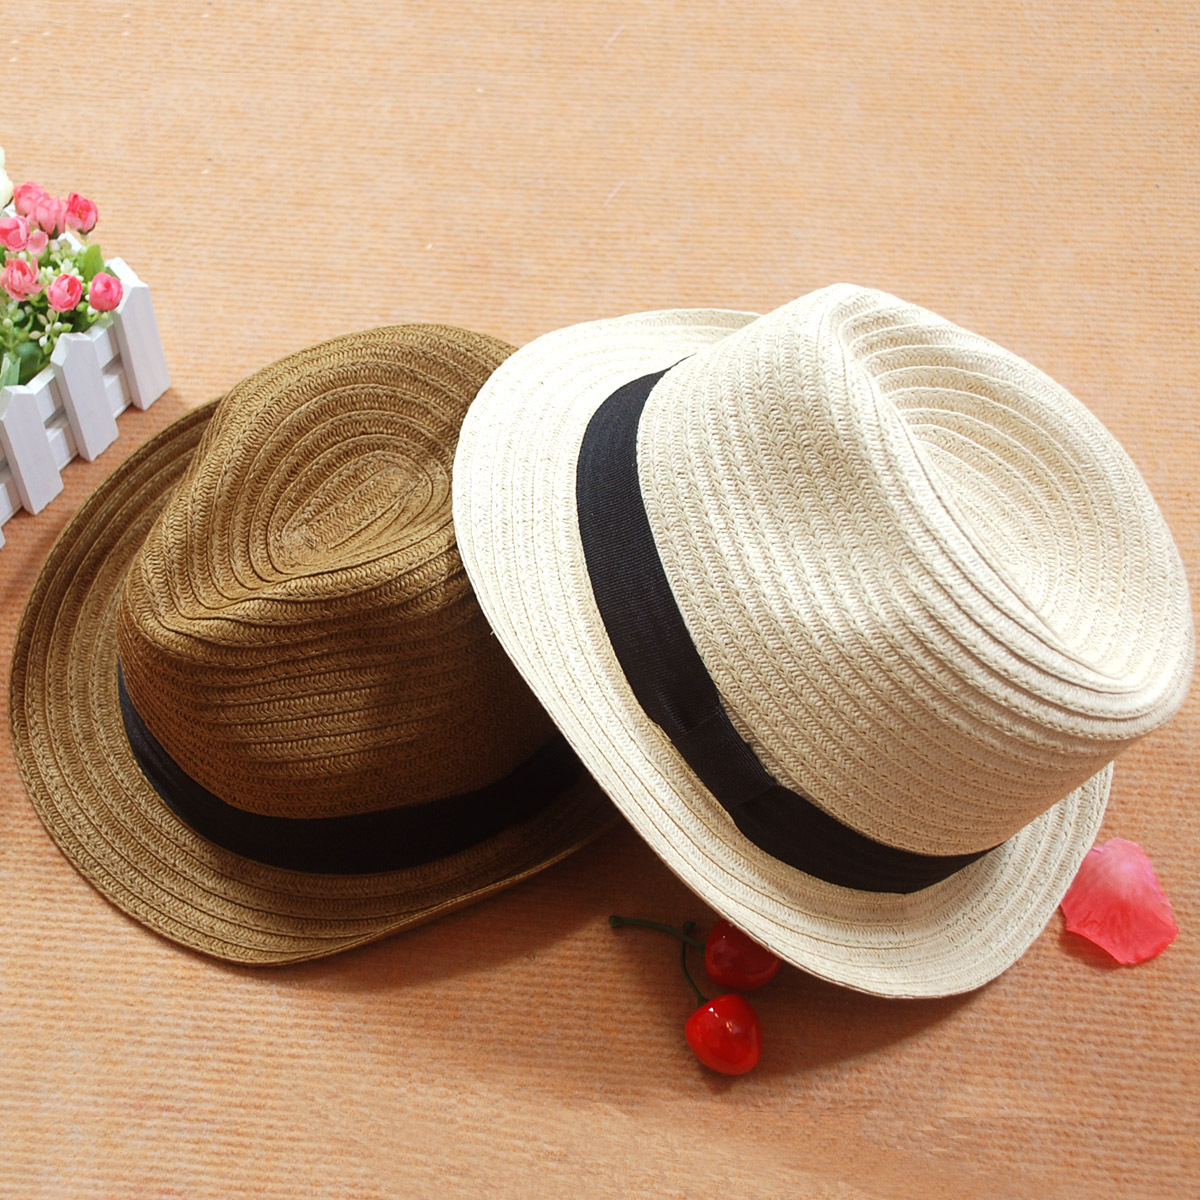 Casual strawhat fashion small fedoras jazz hat in hat off to spring